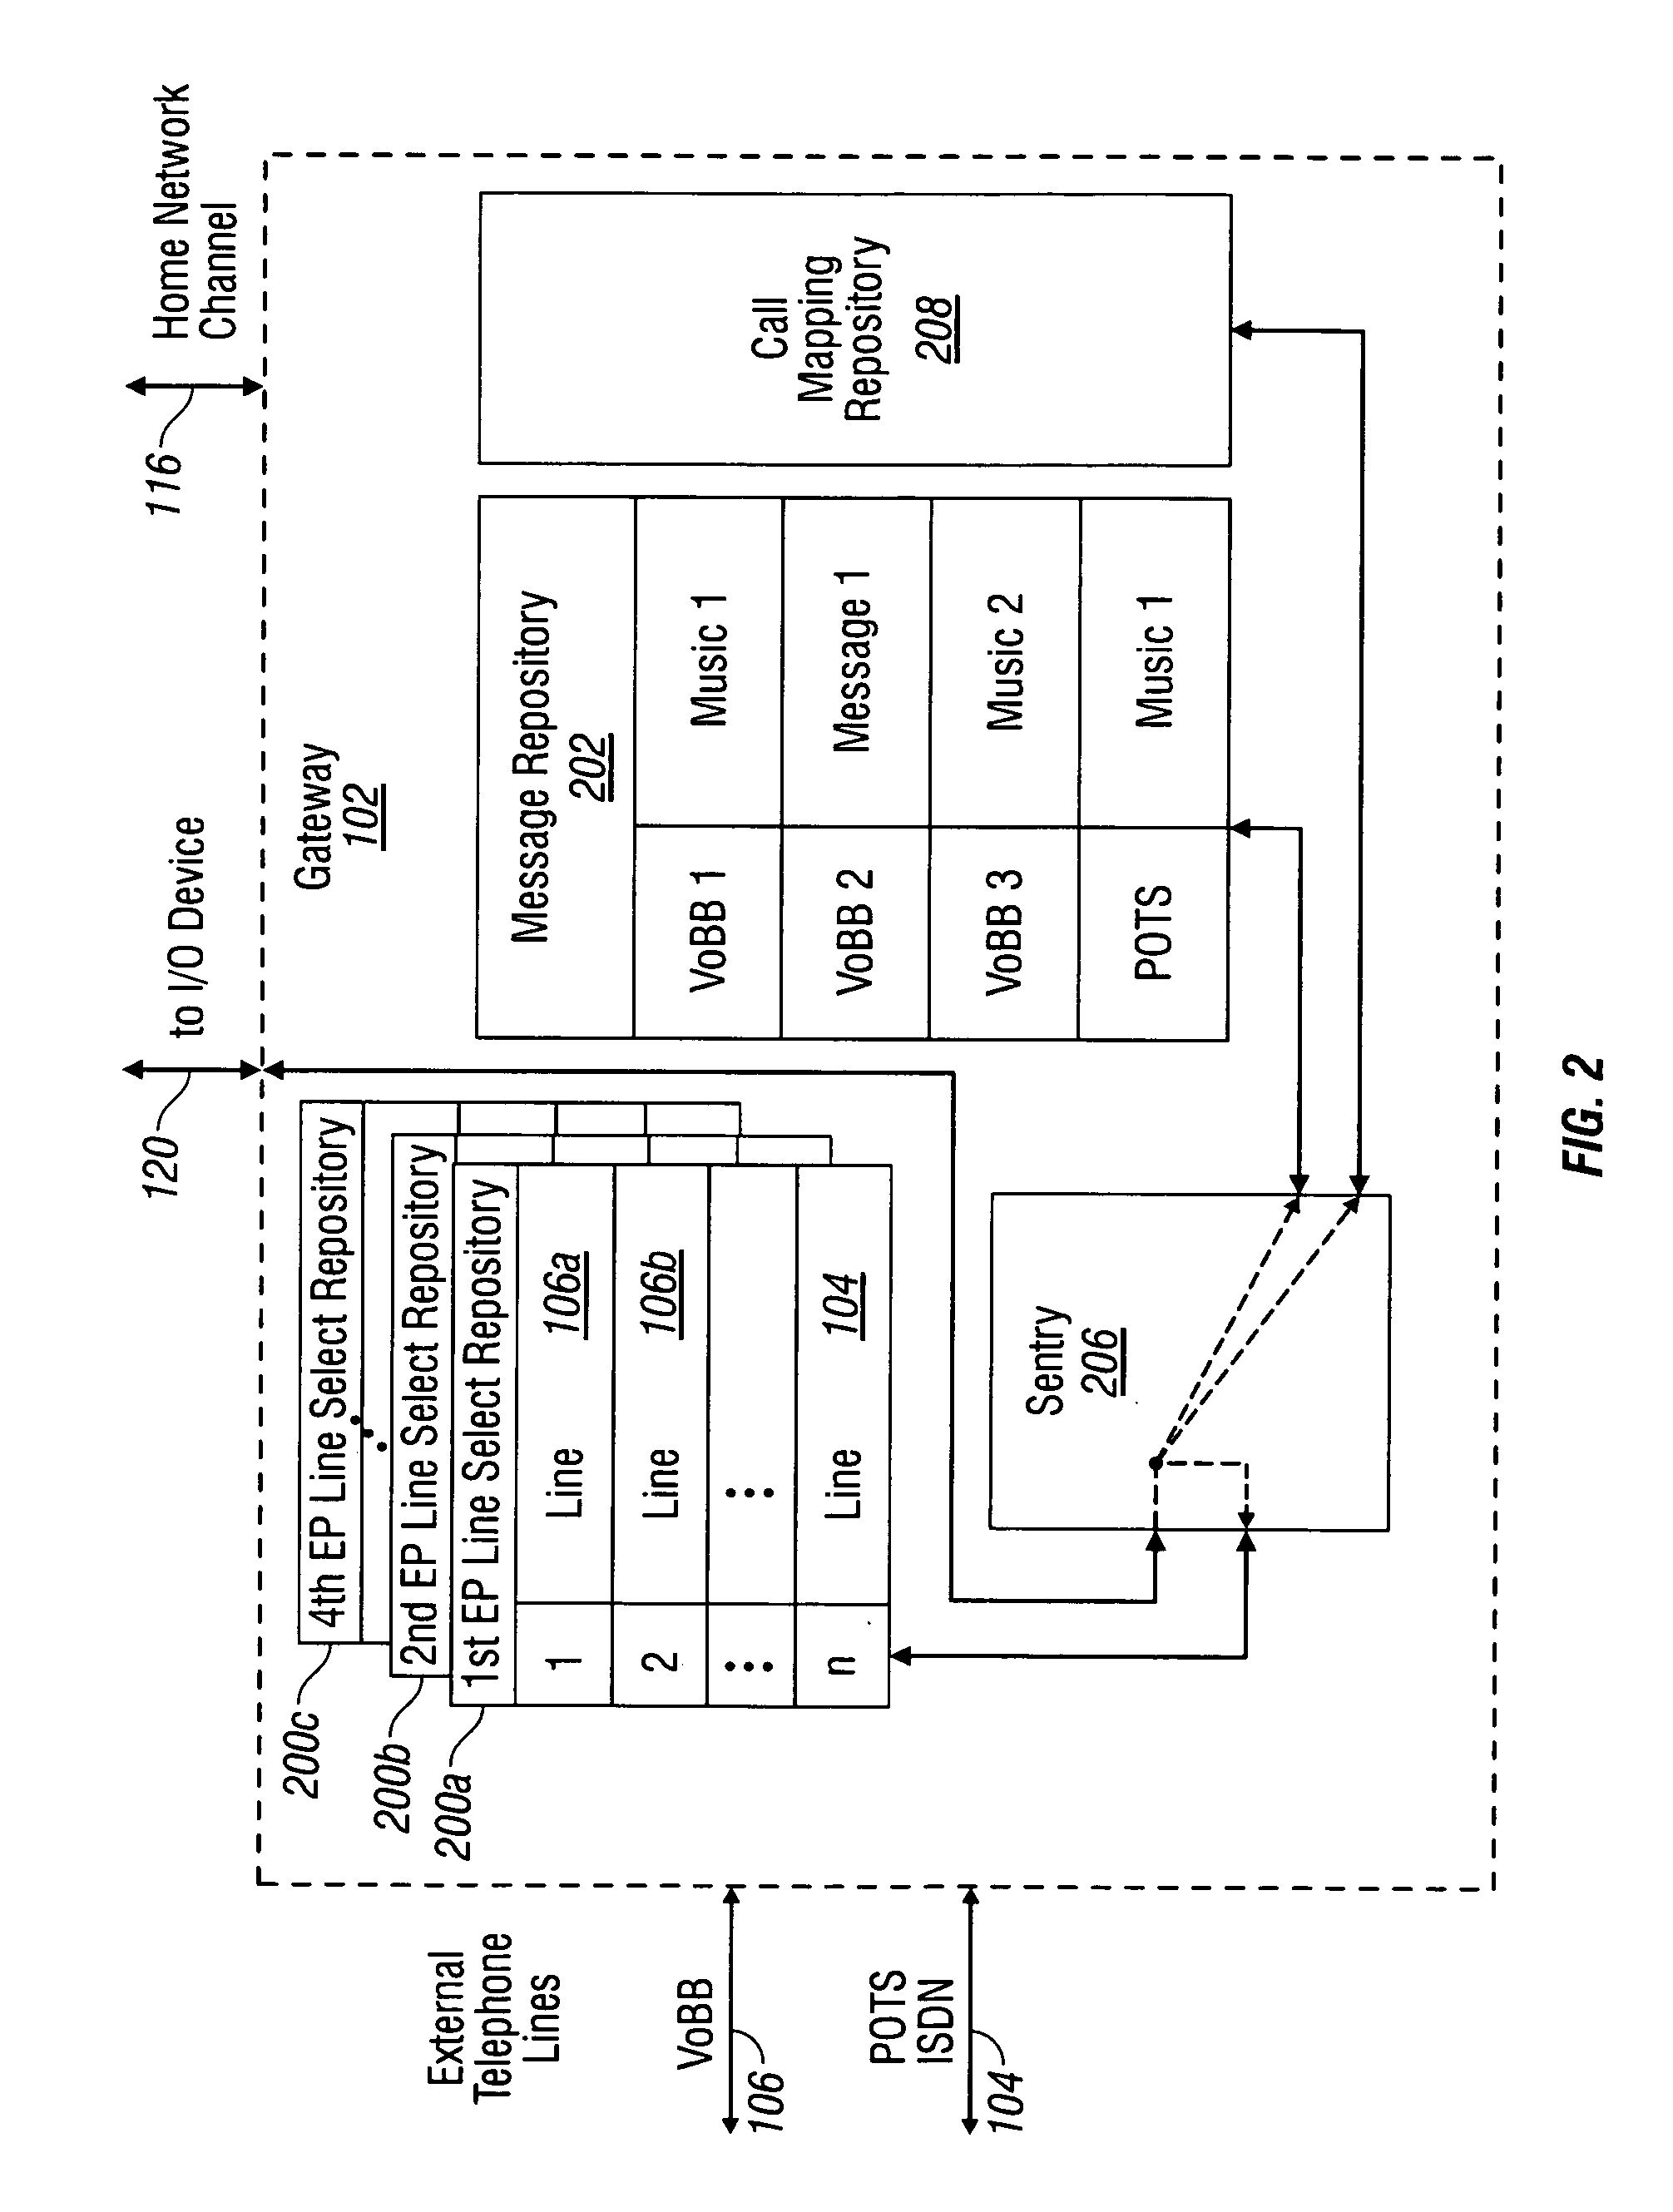 System and method for virtual multiline telephony in a home-network telephone